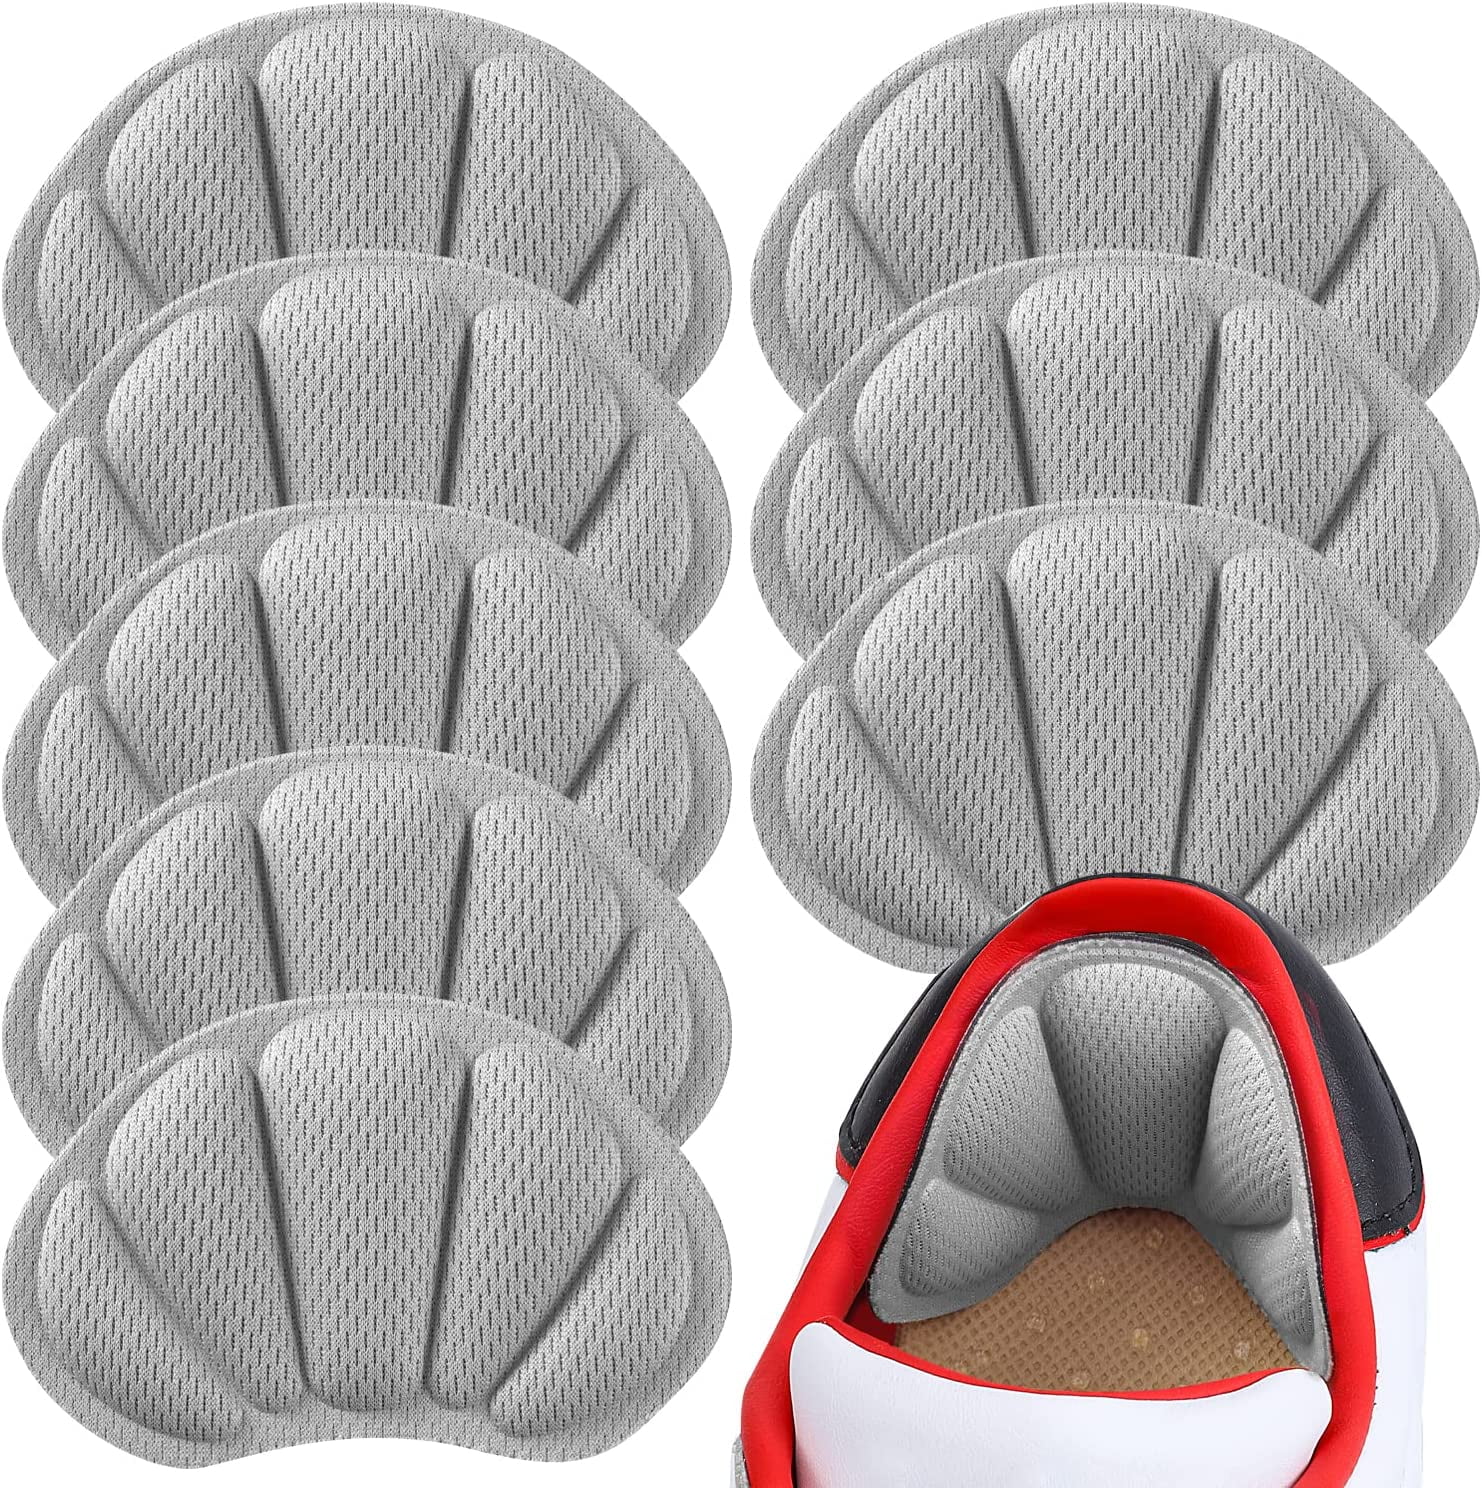 Amazon.com: Heel Cushion Pads, Adhesive Back of Heel Grips Inserts for Boots,  Too Big Loose Shoes, Reusable Heel Guards Liners for Women Men, Improve Shoe  Fit,4PCS-Beige+4PCS-Beige : Health & Household